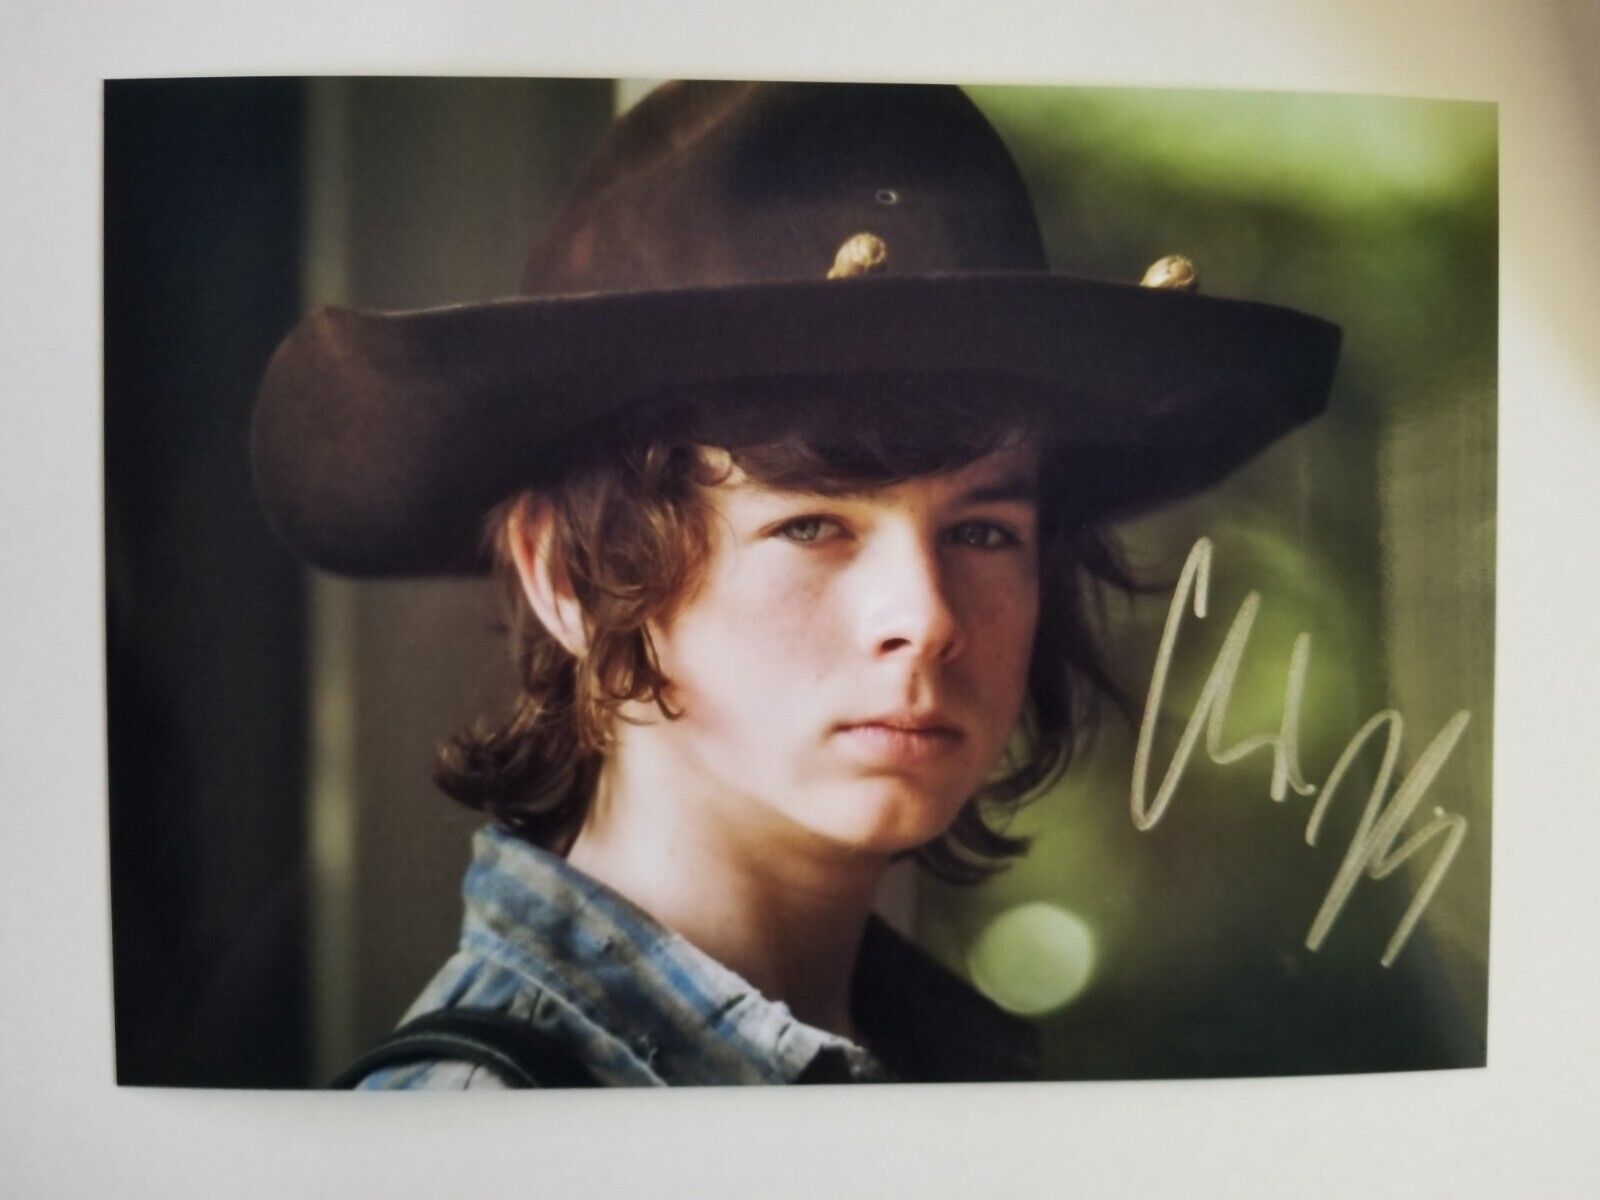 The Walking Dead Signed 8x10 Photo Rp - Free Shipn! Chandler Riggs